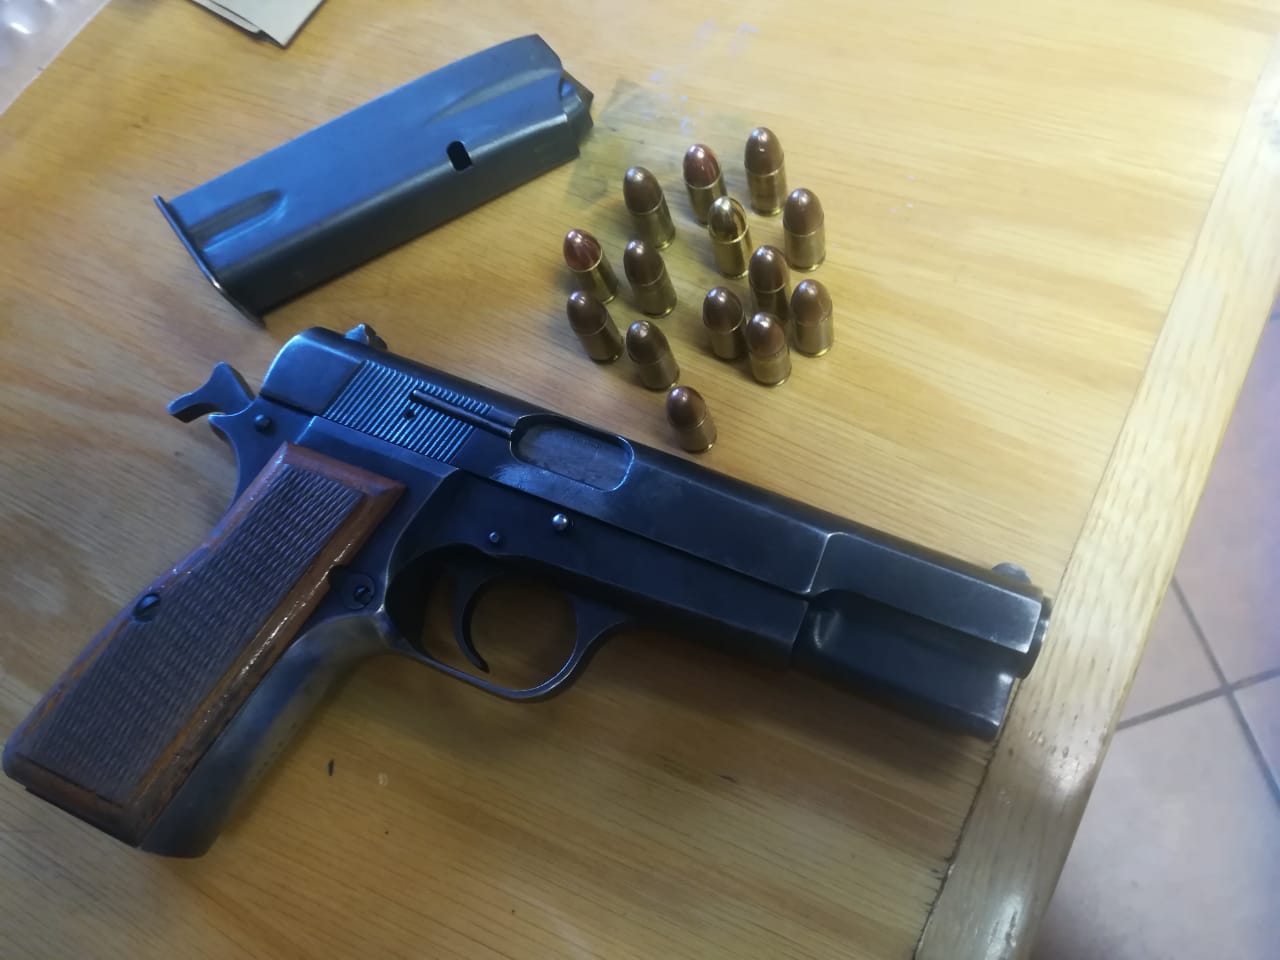 Police in Gauteng arrest over twenty suspects and recover 12 unlicensed firearms